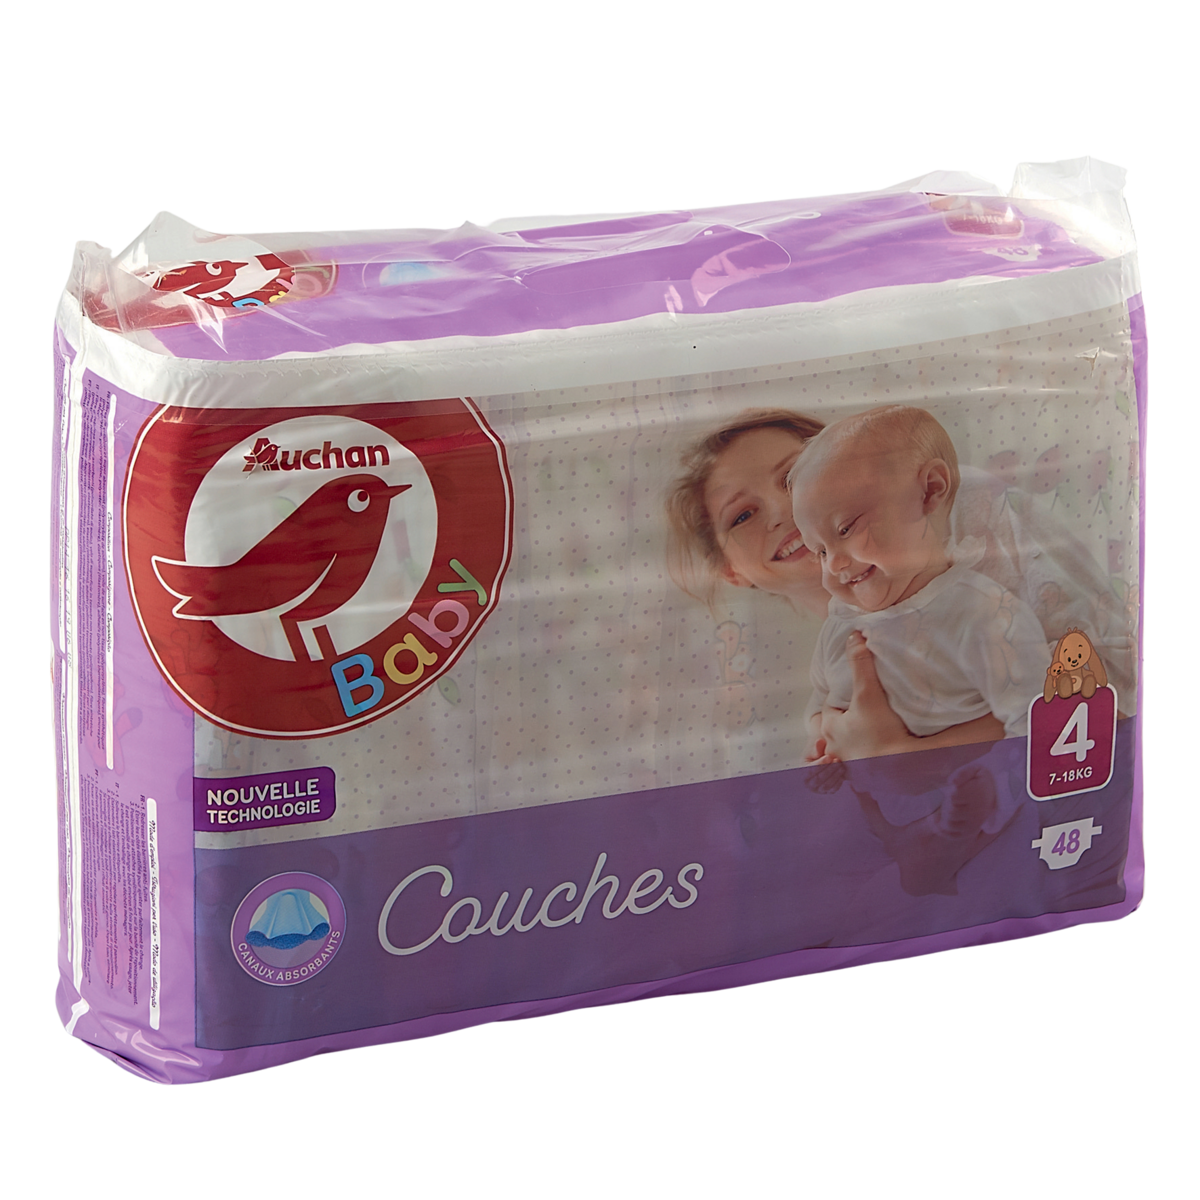 AUCHAN BABY Couches taille 4 (7-18kg) 48 couches pas cher 